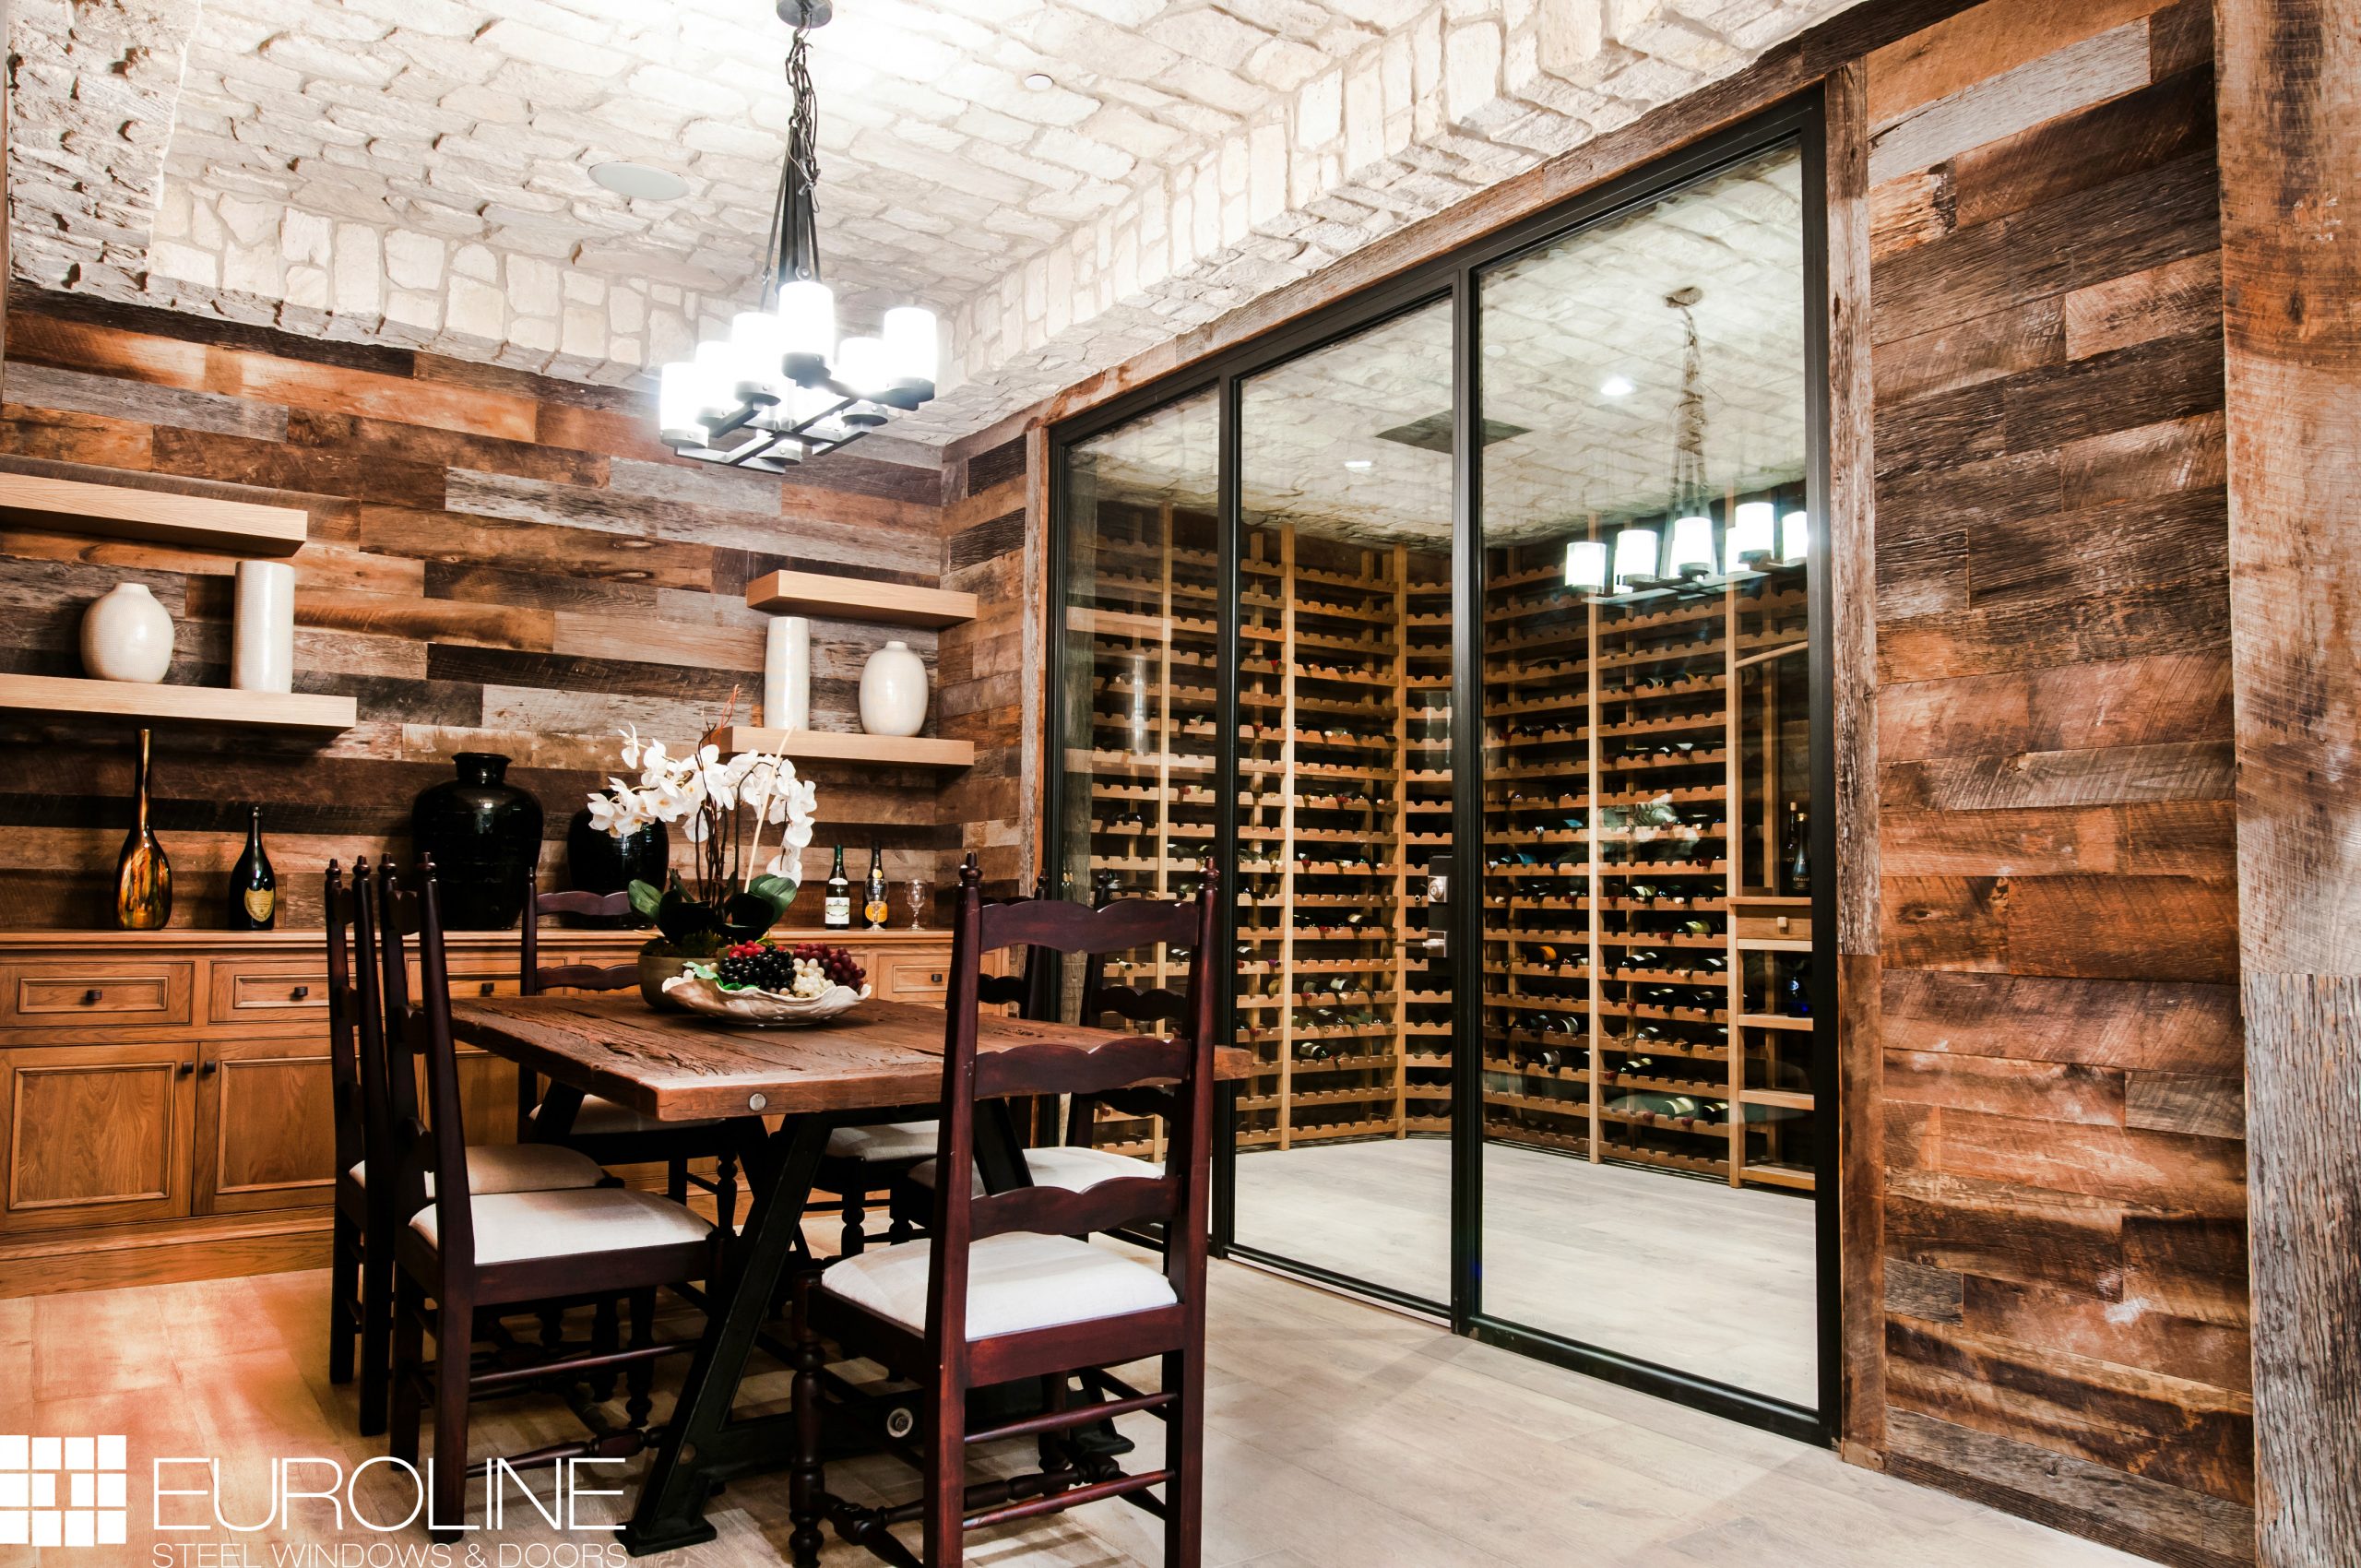 Interior view of a wine cellar with Euroline doors